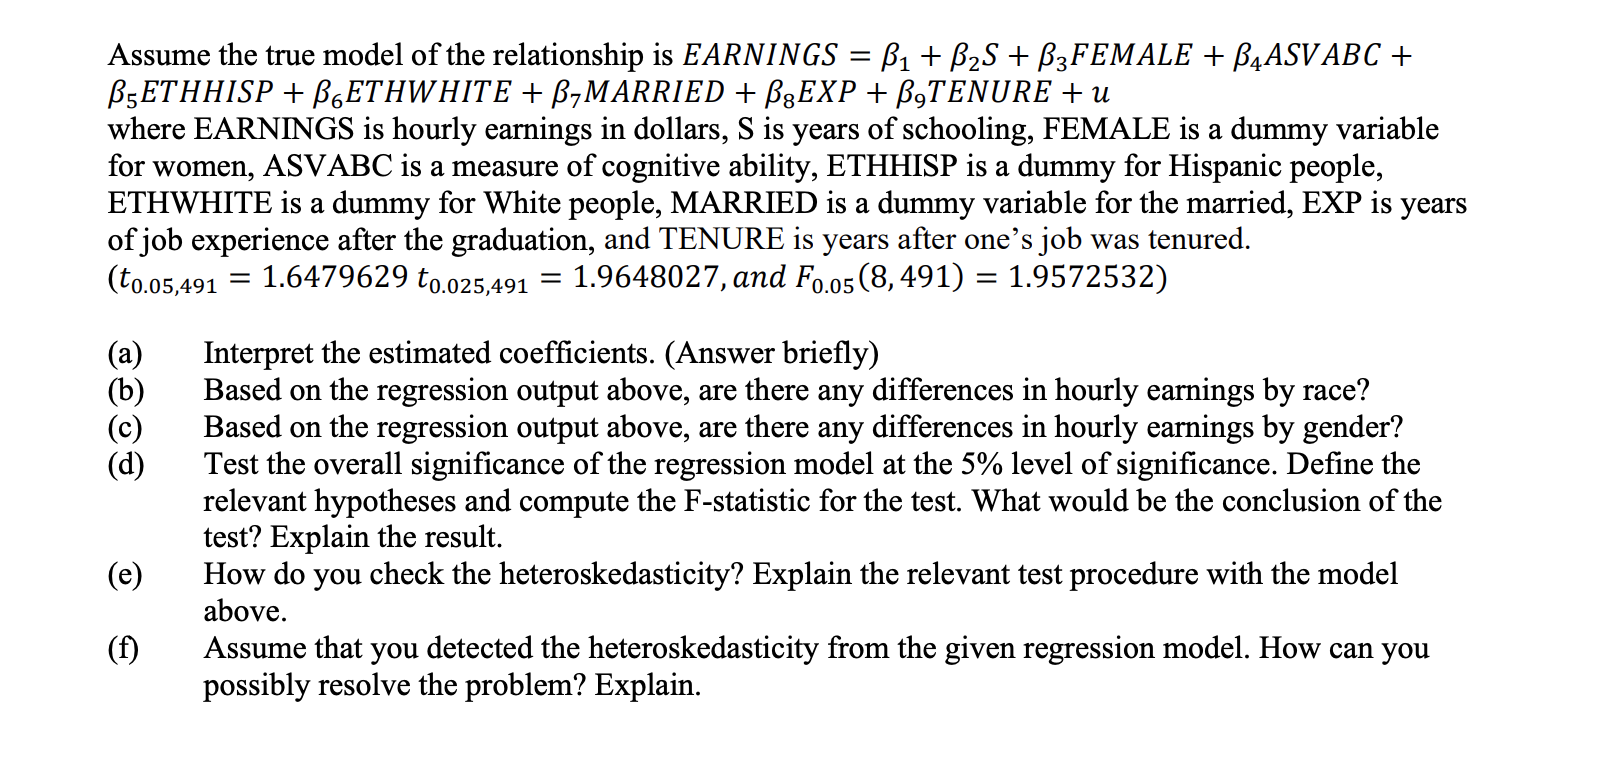 Assume the true model of the relationship is EARNINGS = ß1 + B2S + B3FEMALE + B4ASV ABC +
В-ЕТНHISP + BsЕТHWHITE + B-MARRIED + B3EXP + B9TENURE + u
where EARNINGS is hourly earnings in dollars, S is years of schooling, FEMALE is a dummy variable
for women, ASVABC is a measure of cognitive ability, ETHHISP is a dummy for Hispanic people,
ETHWHITE is a dummy for White people, MARRIED is a dummy variable for the married, EXP is
of job experience after the graduation, and TENURE is years after one's job was tenured.
(to.05,491
years
= 1.6479629 to.025,491
1.9648027, and Fo.05(8, 491) = 1.9572532)
Interpret the estimated coefficients. (Answer briefly)
Based on the regression output above, are there any differences in hourly earnings by race?
Based on the regression output above, are there any differences in hourly earnings by gender?
Test the overall significance of the regression model at the 5% level of significance. Define the
relevant hypotheses and compute the F-statistic for the test. What would be the conclusion of the
test? Explain the result.
How do you check the heteroskedasticity? Explain the relevant test procedure with the model
above.
(a)
(b)
(c)
(d)
(e)
(f)
Assume that you detected the heteroskedasticity from the given regression model. How can you
possibly resolve the problem? Explain.
